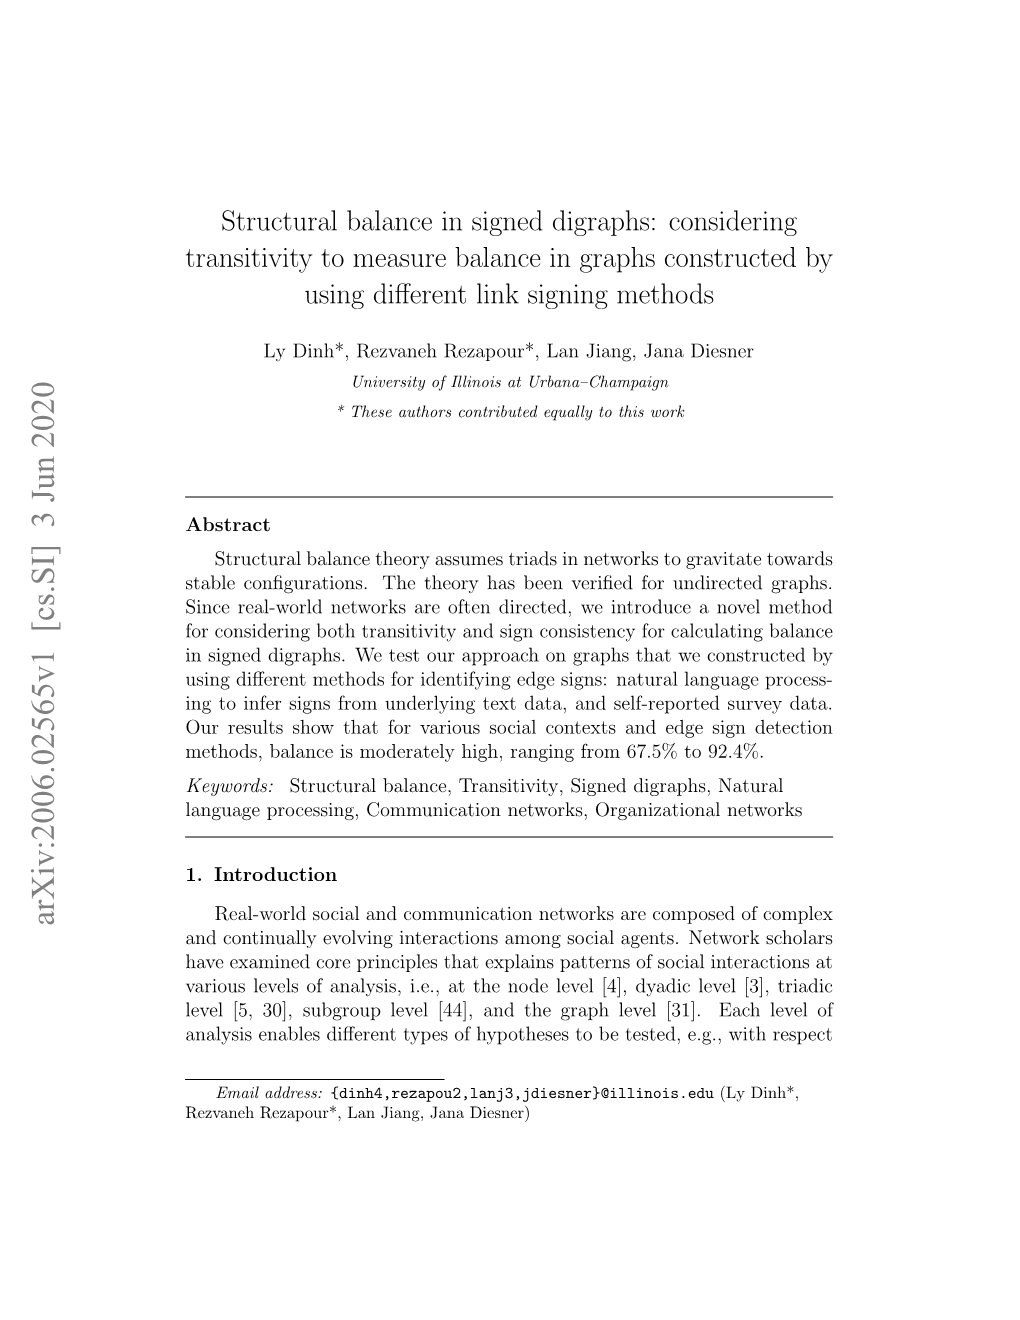 Structural Balance in Signed Digraphs: Considering Transitivity to Measure Balance in Graphs Constructed by Using Diﬀerent Link Signing Methods